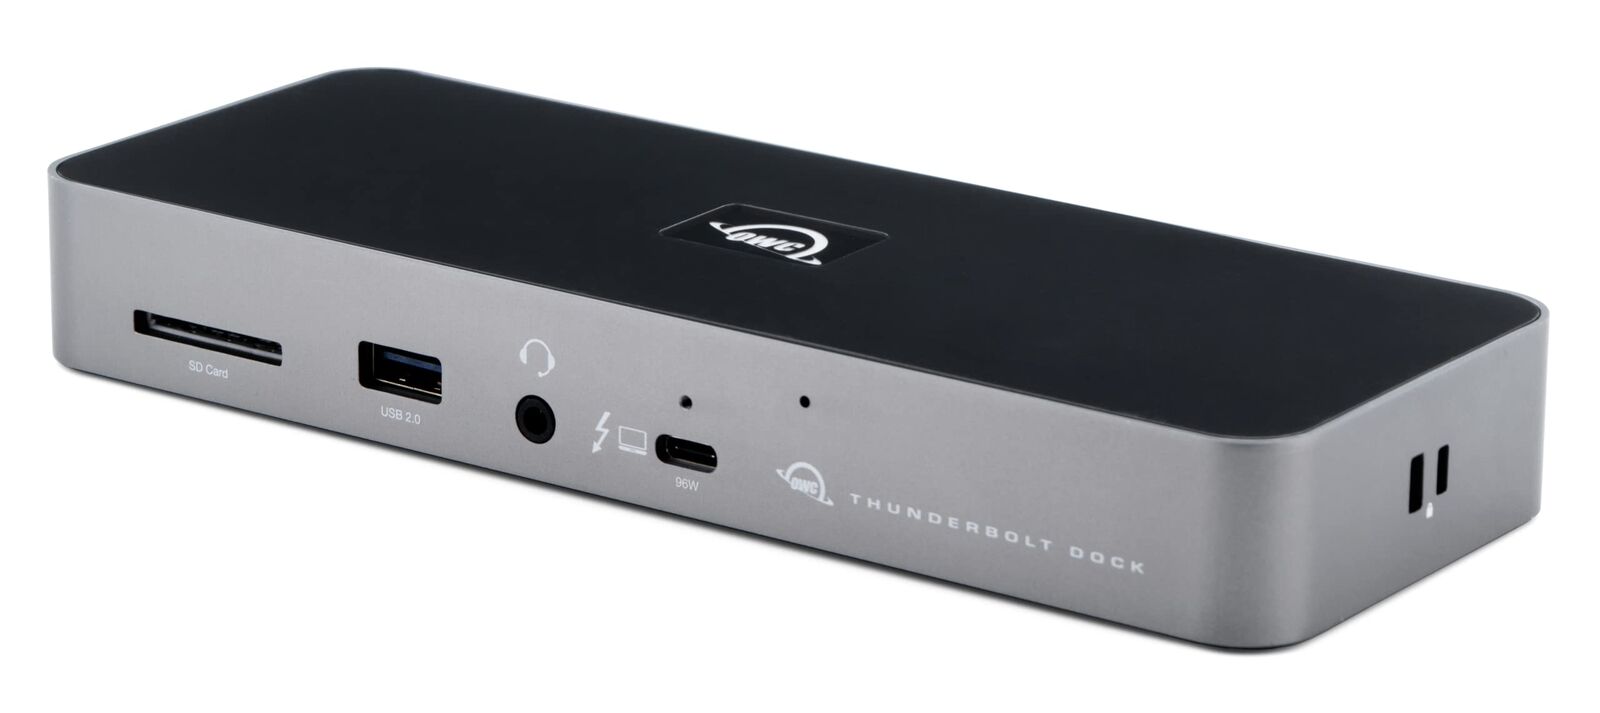 11-Port Thunderbolt Dock with 4 Ports, 4 USB Ports, Ethernet, Audio, and Card...